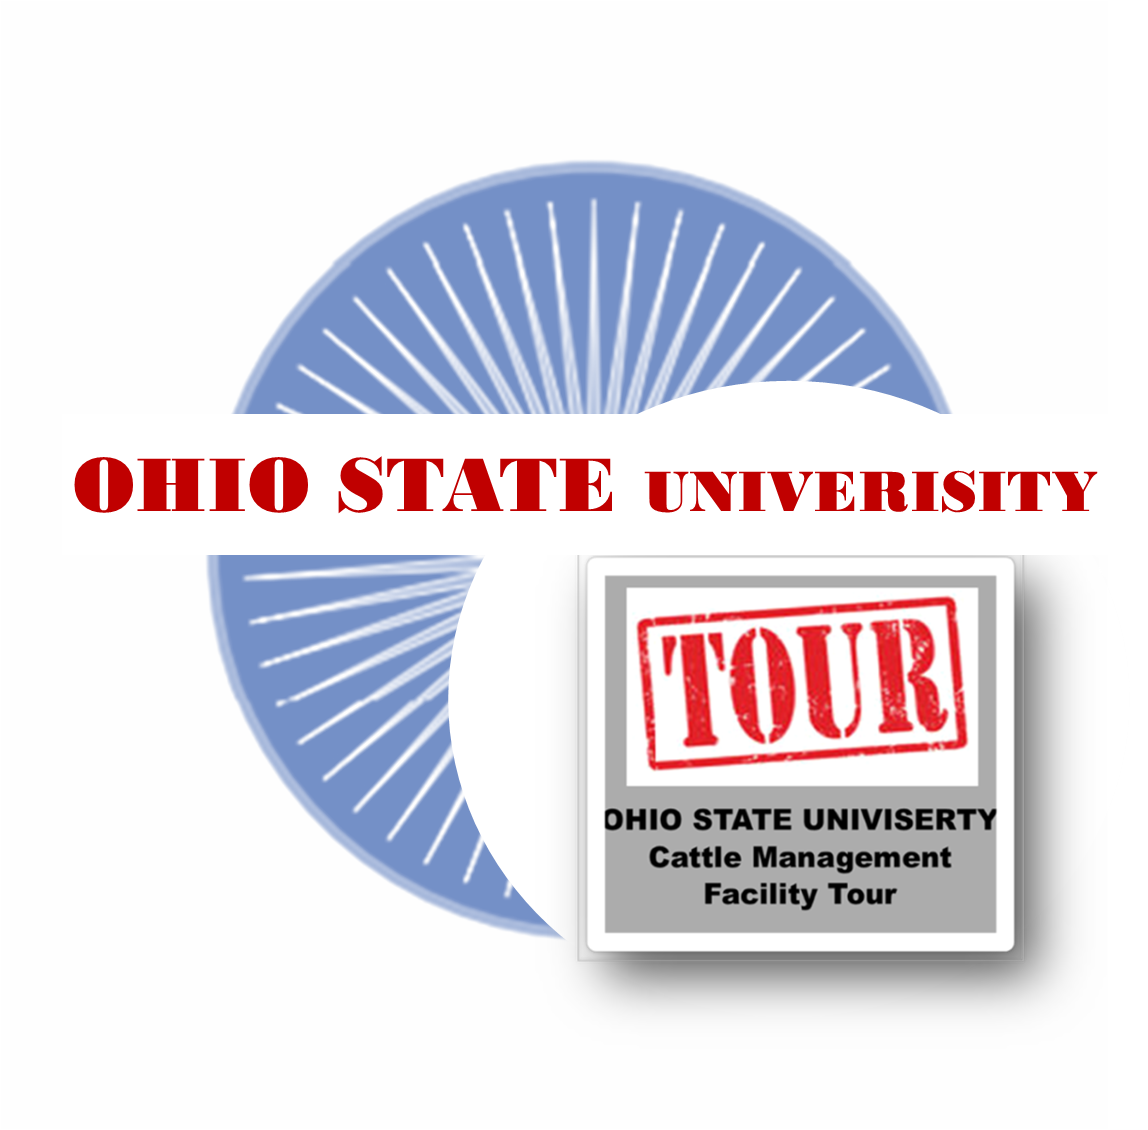 Ohio State University Beef Facility Tour / CFAES Wooster
(Please scroll down for more details about the tour)